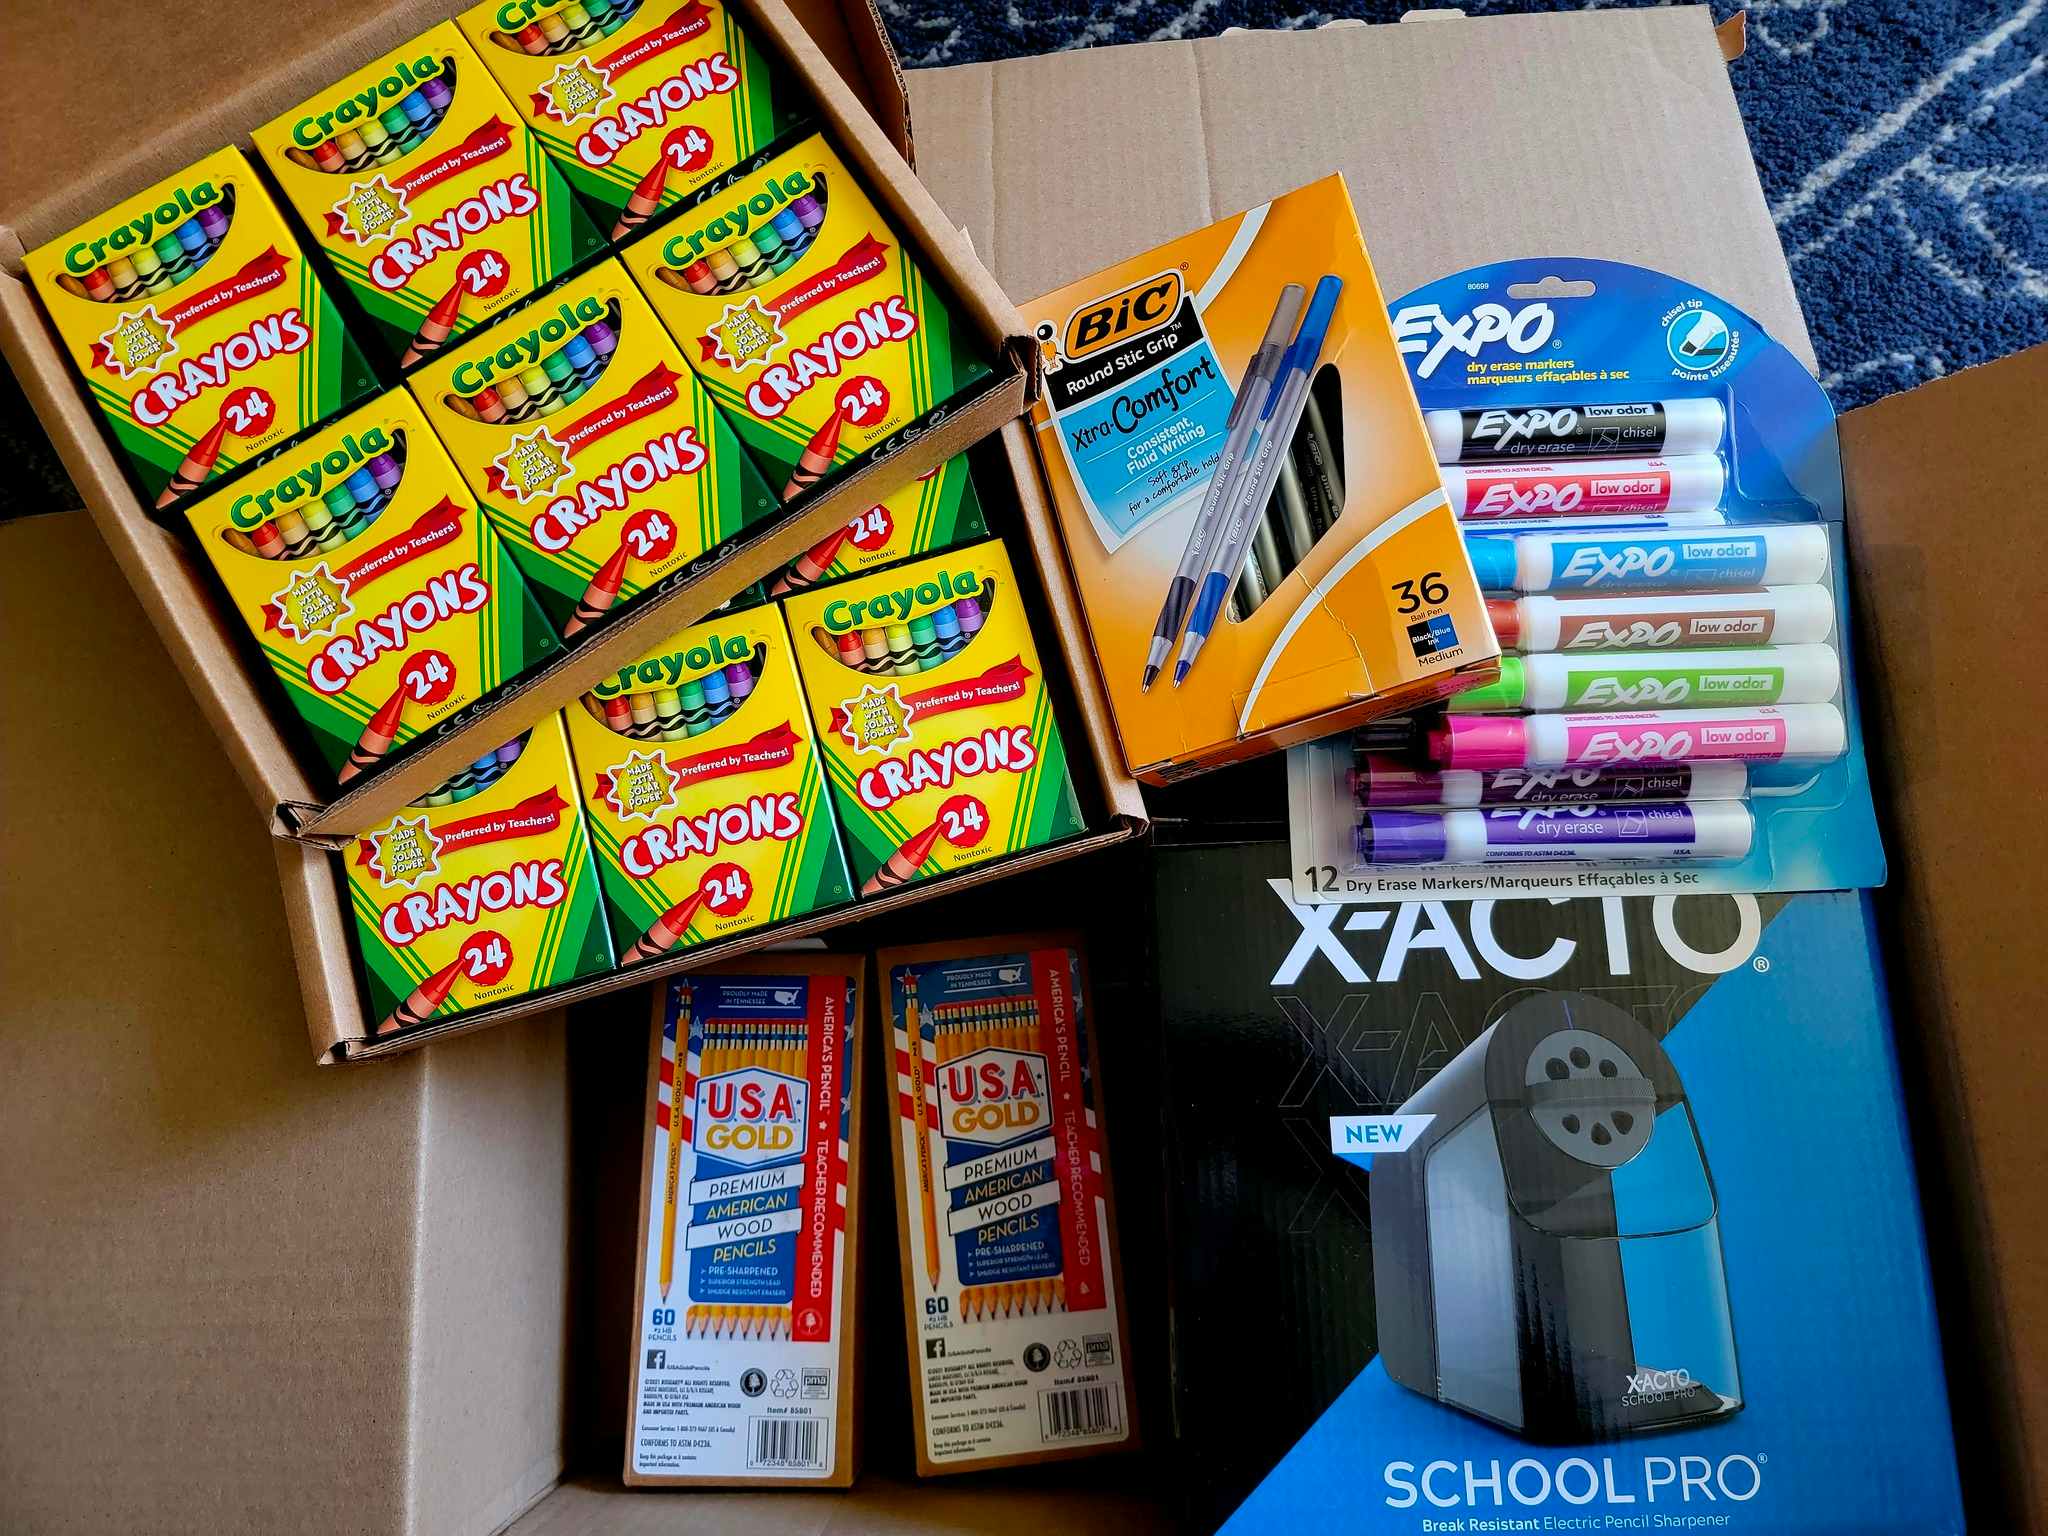 An open Amazon box filled with school supplies for a teacher.